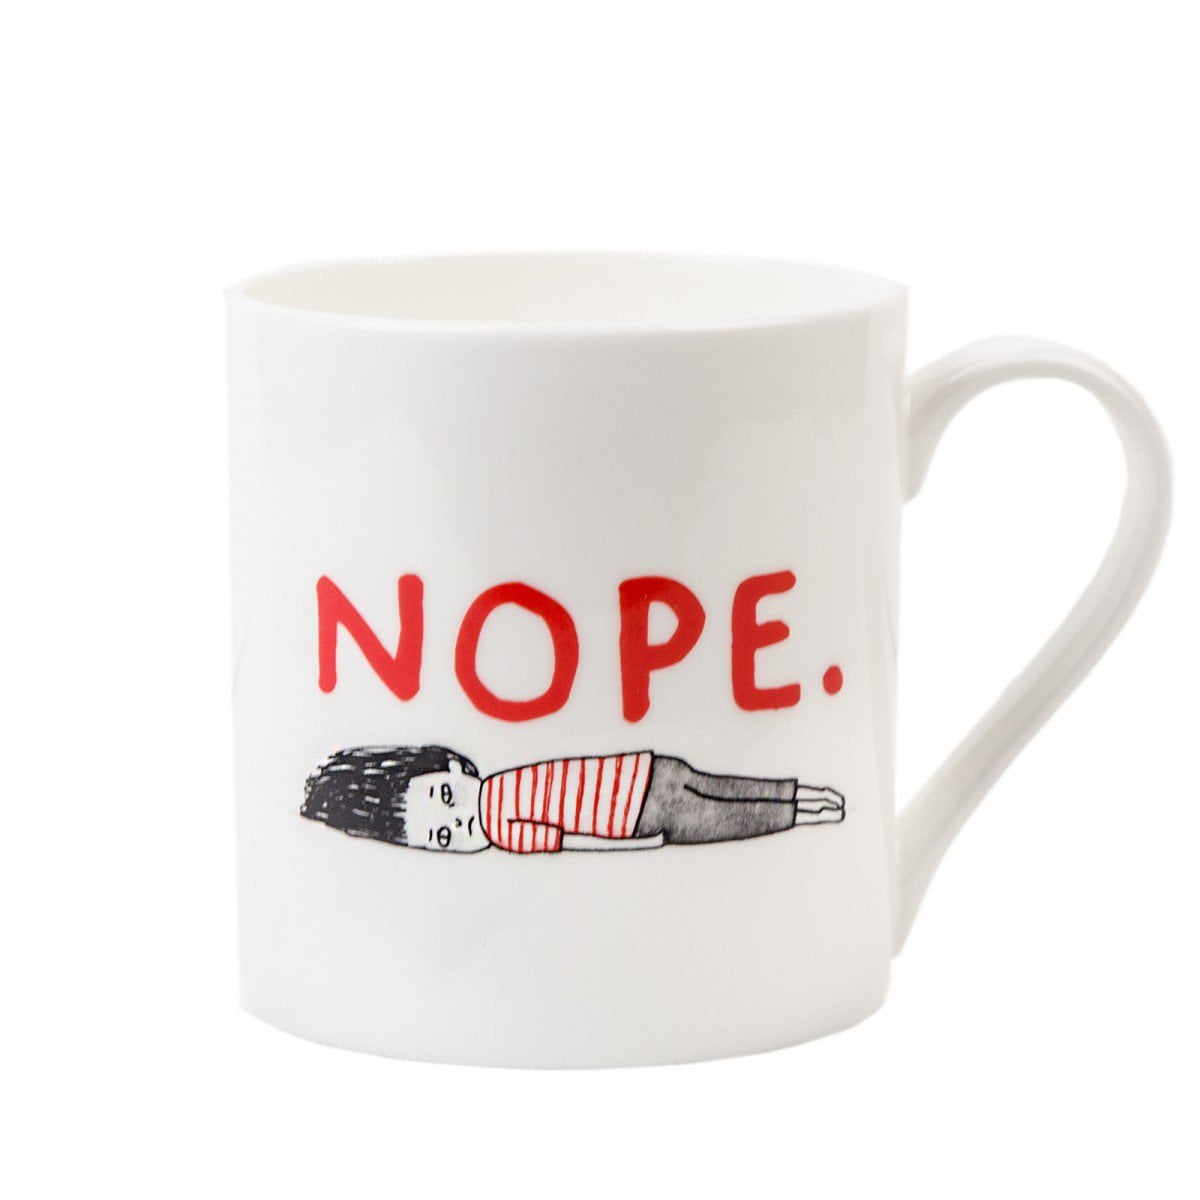 nope mug, gemma correll, can't be bothered, fed up